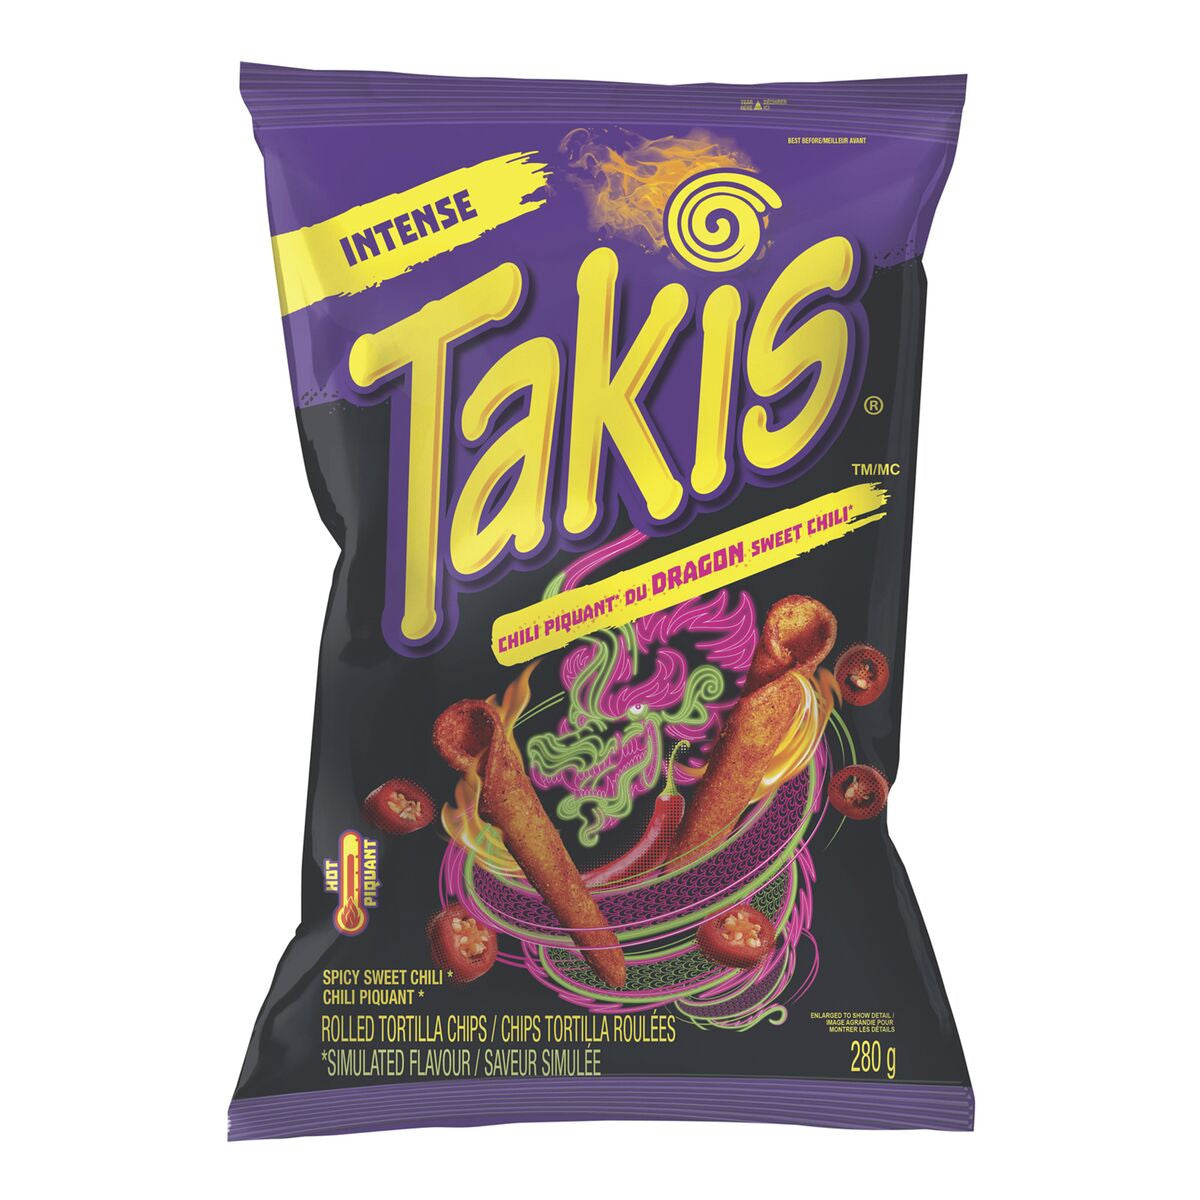 Takis Dragon Sweet Chili Rolled Tortilla Chips, 280g/9.8 oz., Bag {Imported from Canada}